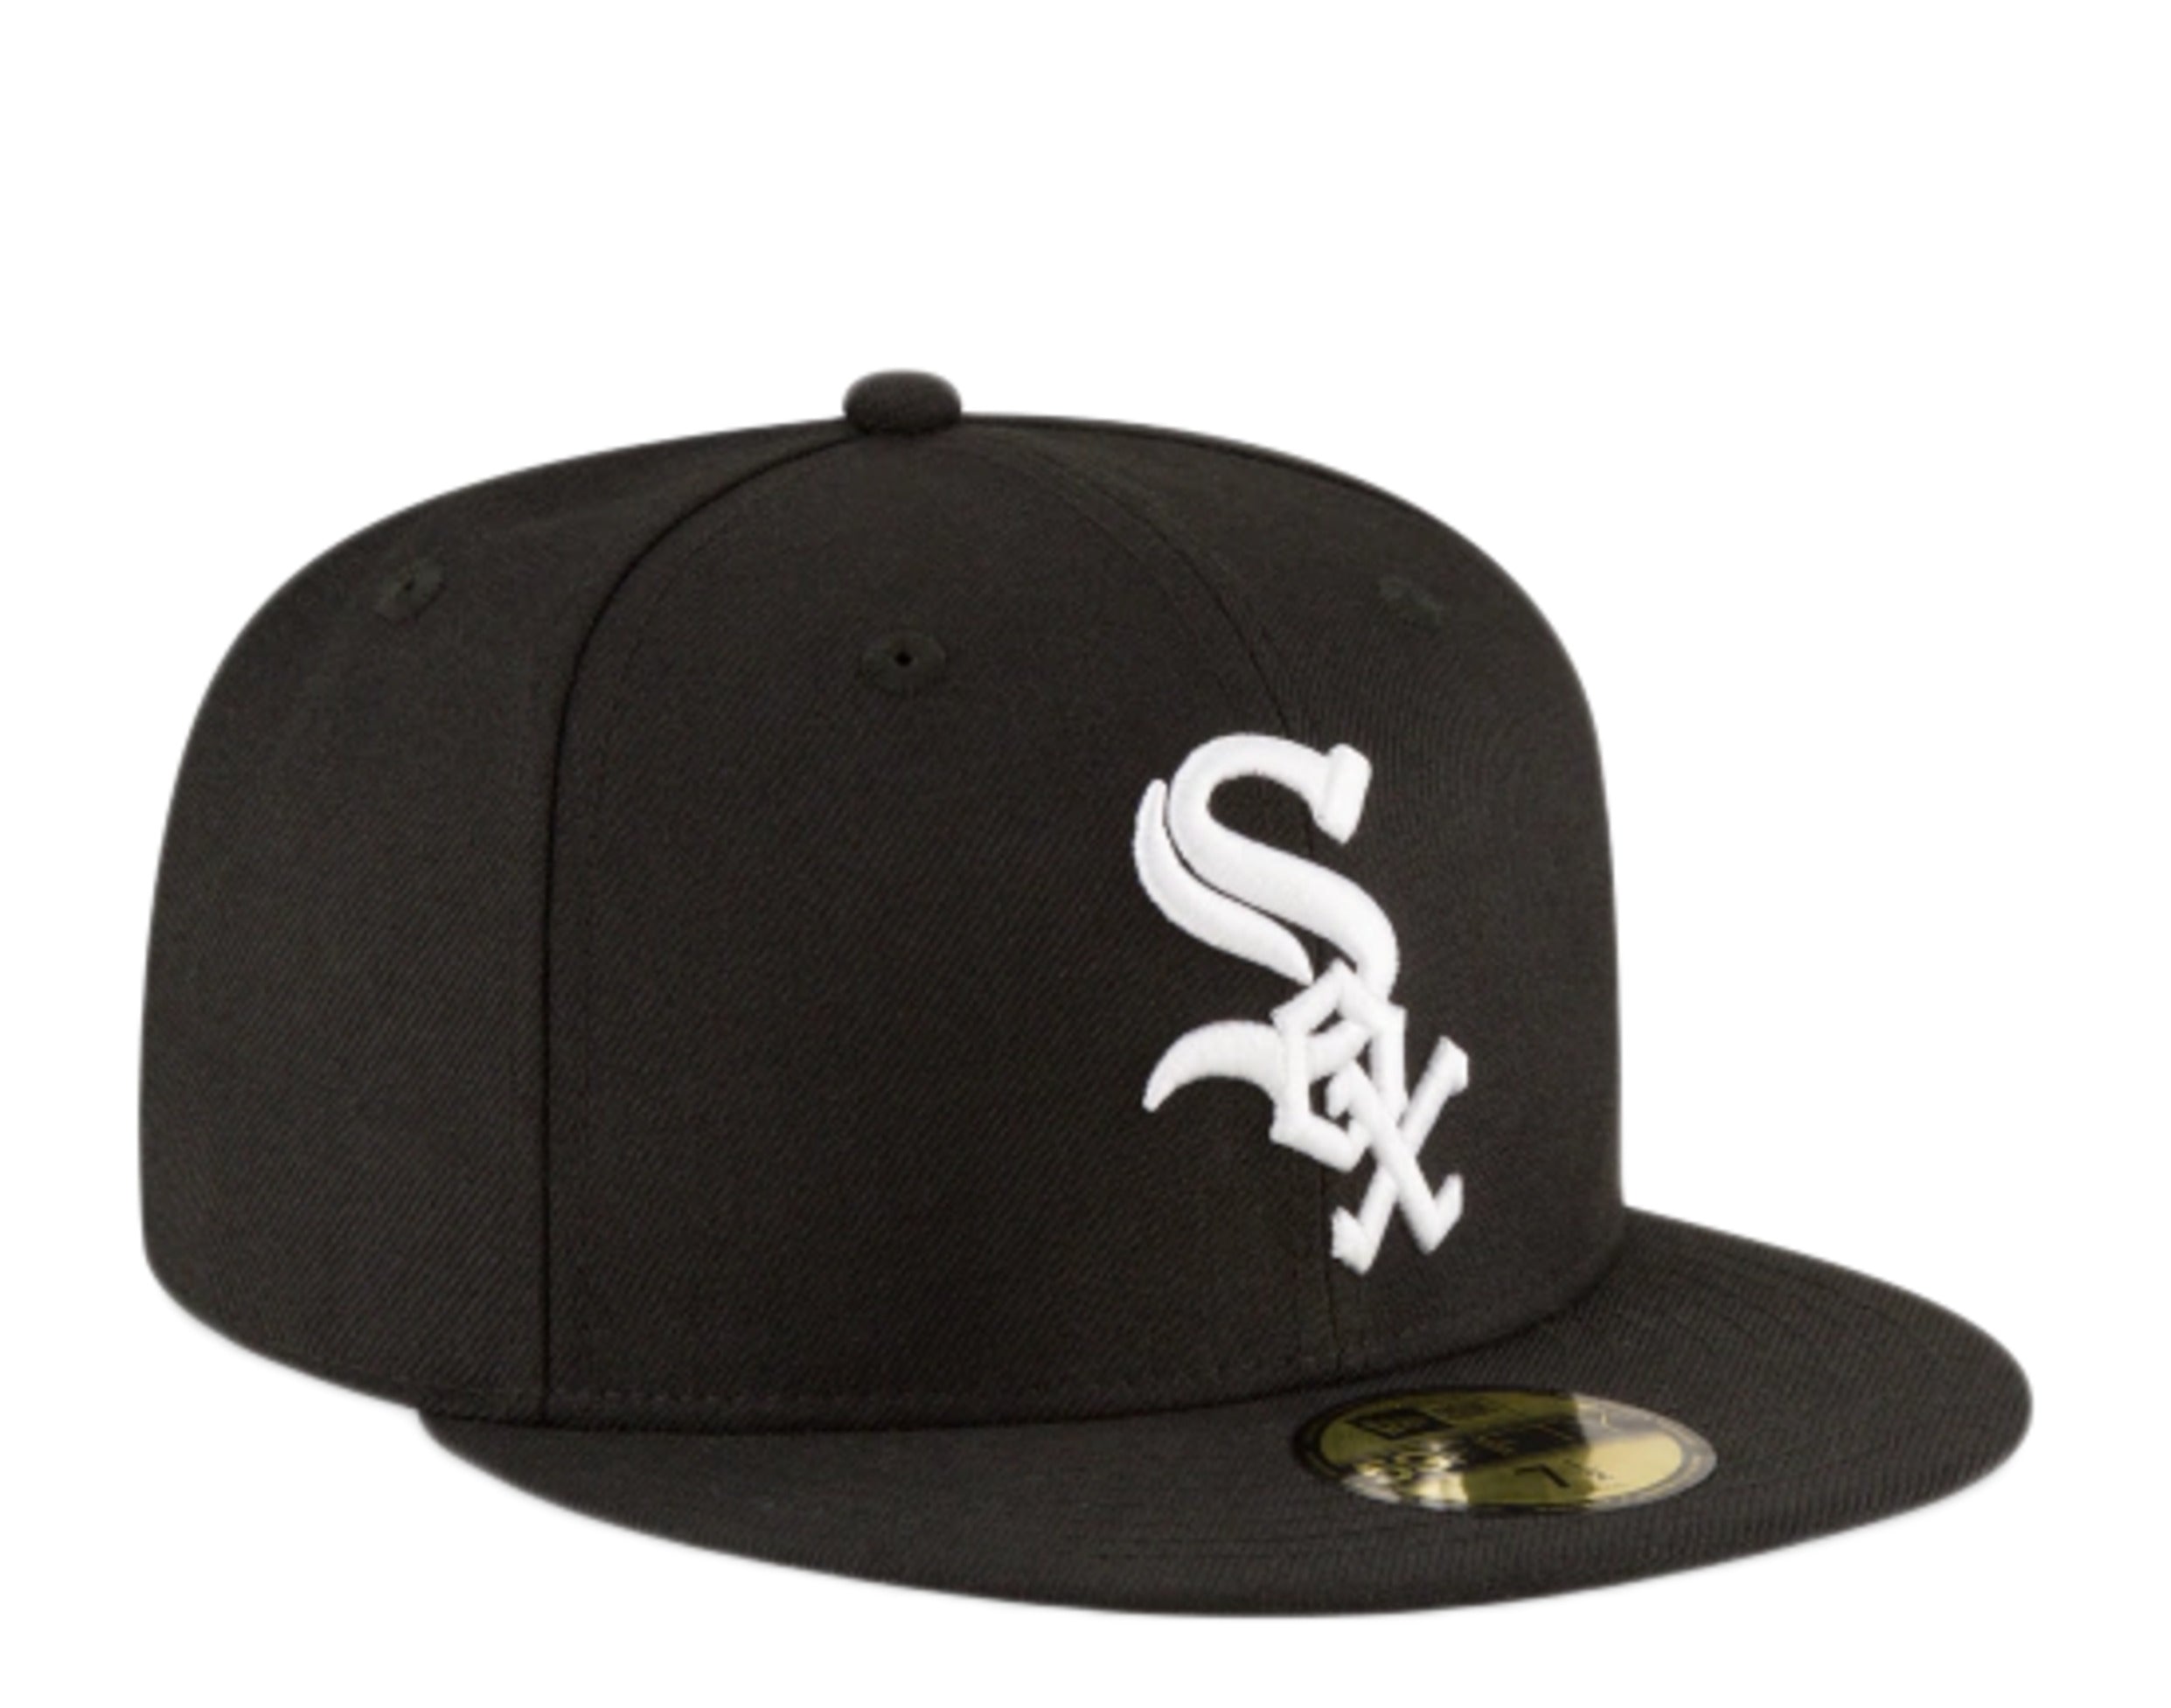 fitted white sox hat world series